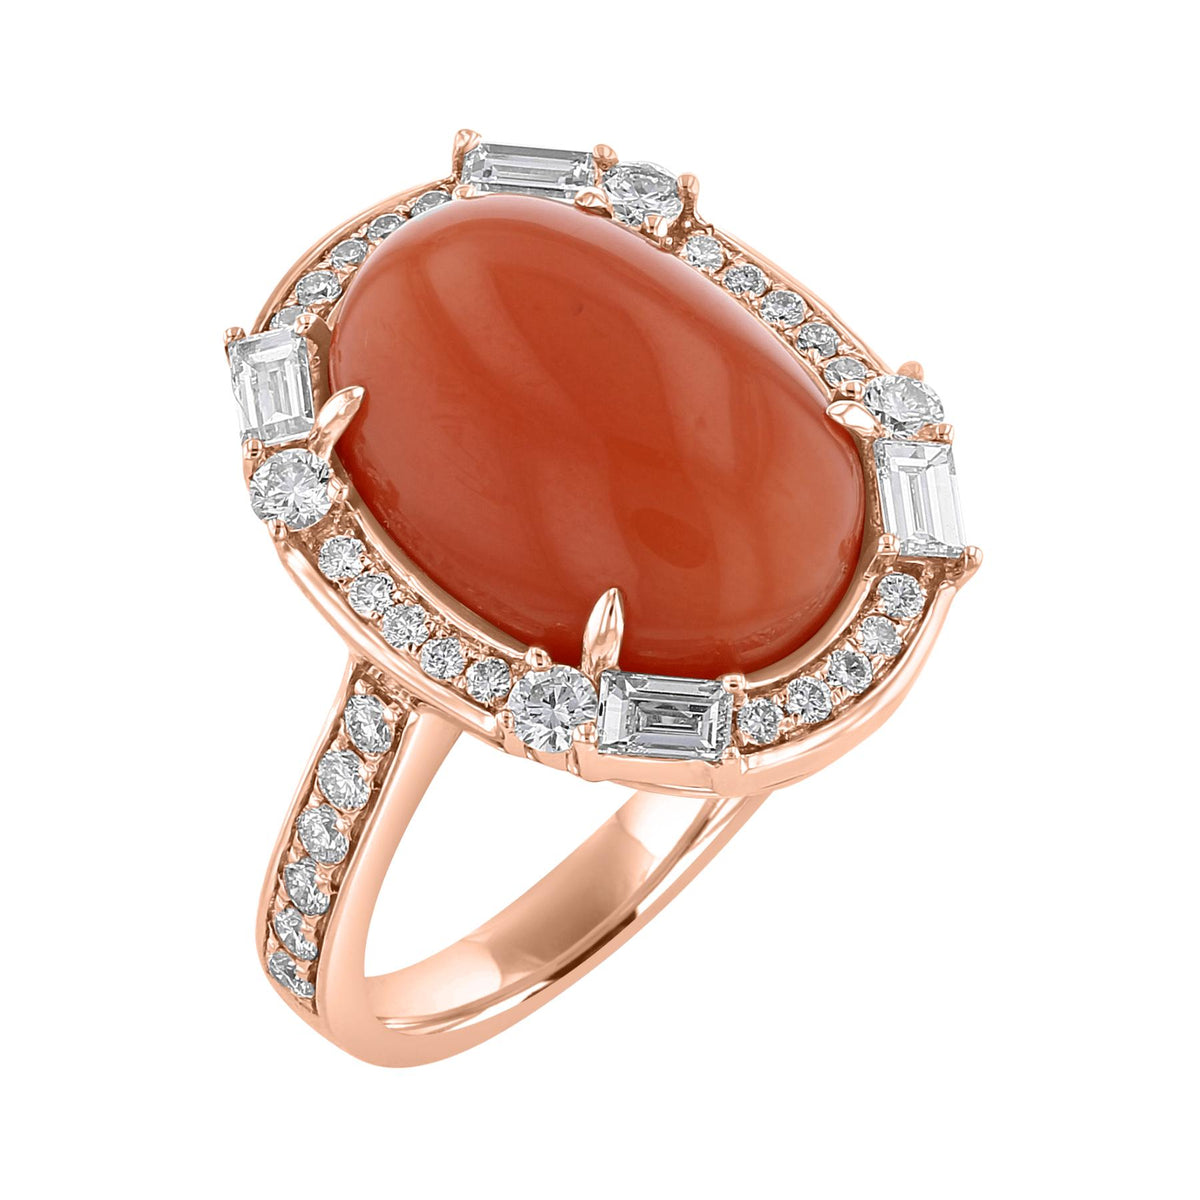 Juleve 18KT 7.00 CT Coral & .75 CTW Diamond Oval Halo Ring 4,4.5,5,5.5,6,6.5,7,7.5,8,8.5,9